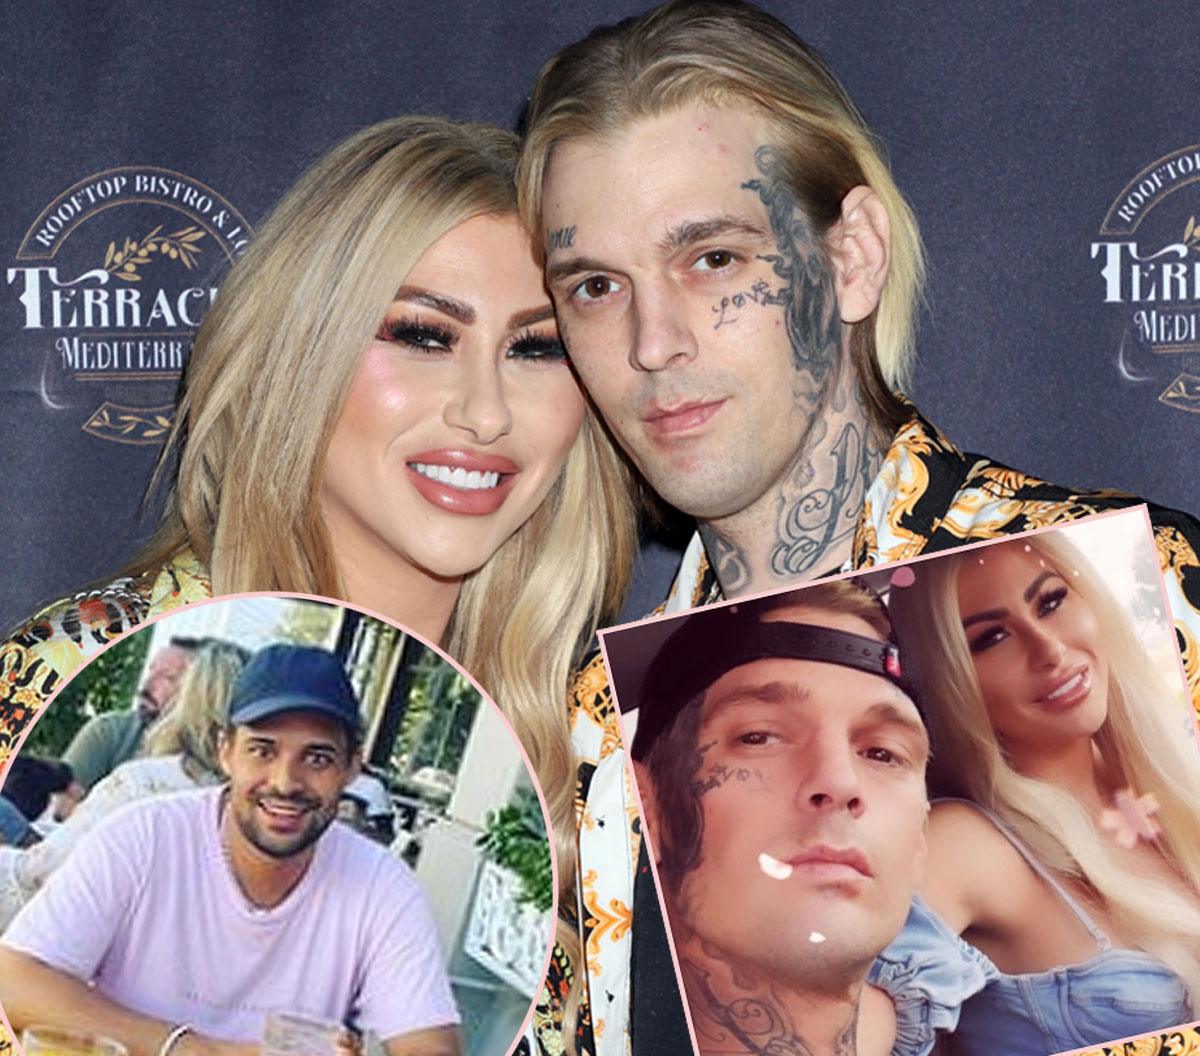 #Aaron Carter’s Fiancée Melanie Martin BLASTS His Manager, Says He ‘Had A Hand In His Relapse’